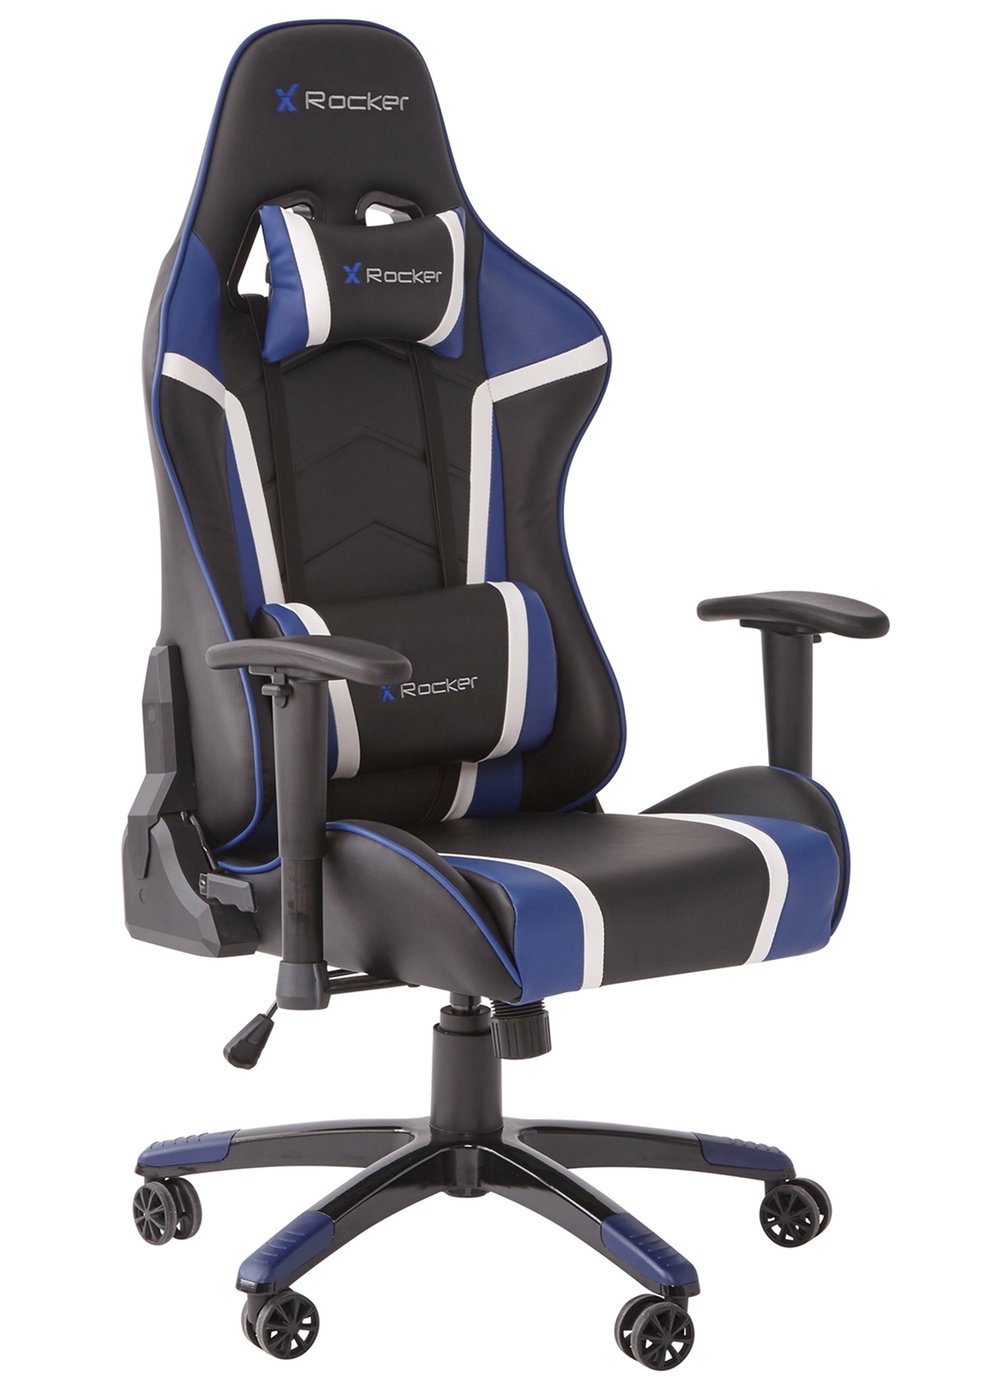 X Rocker Agility Faux Leather Gaming Chair - Black & Blue